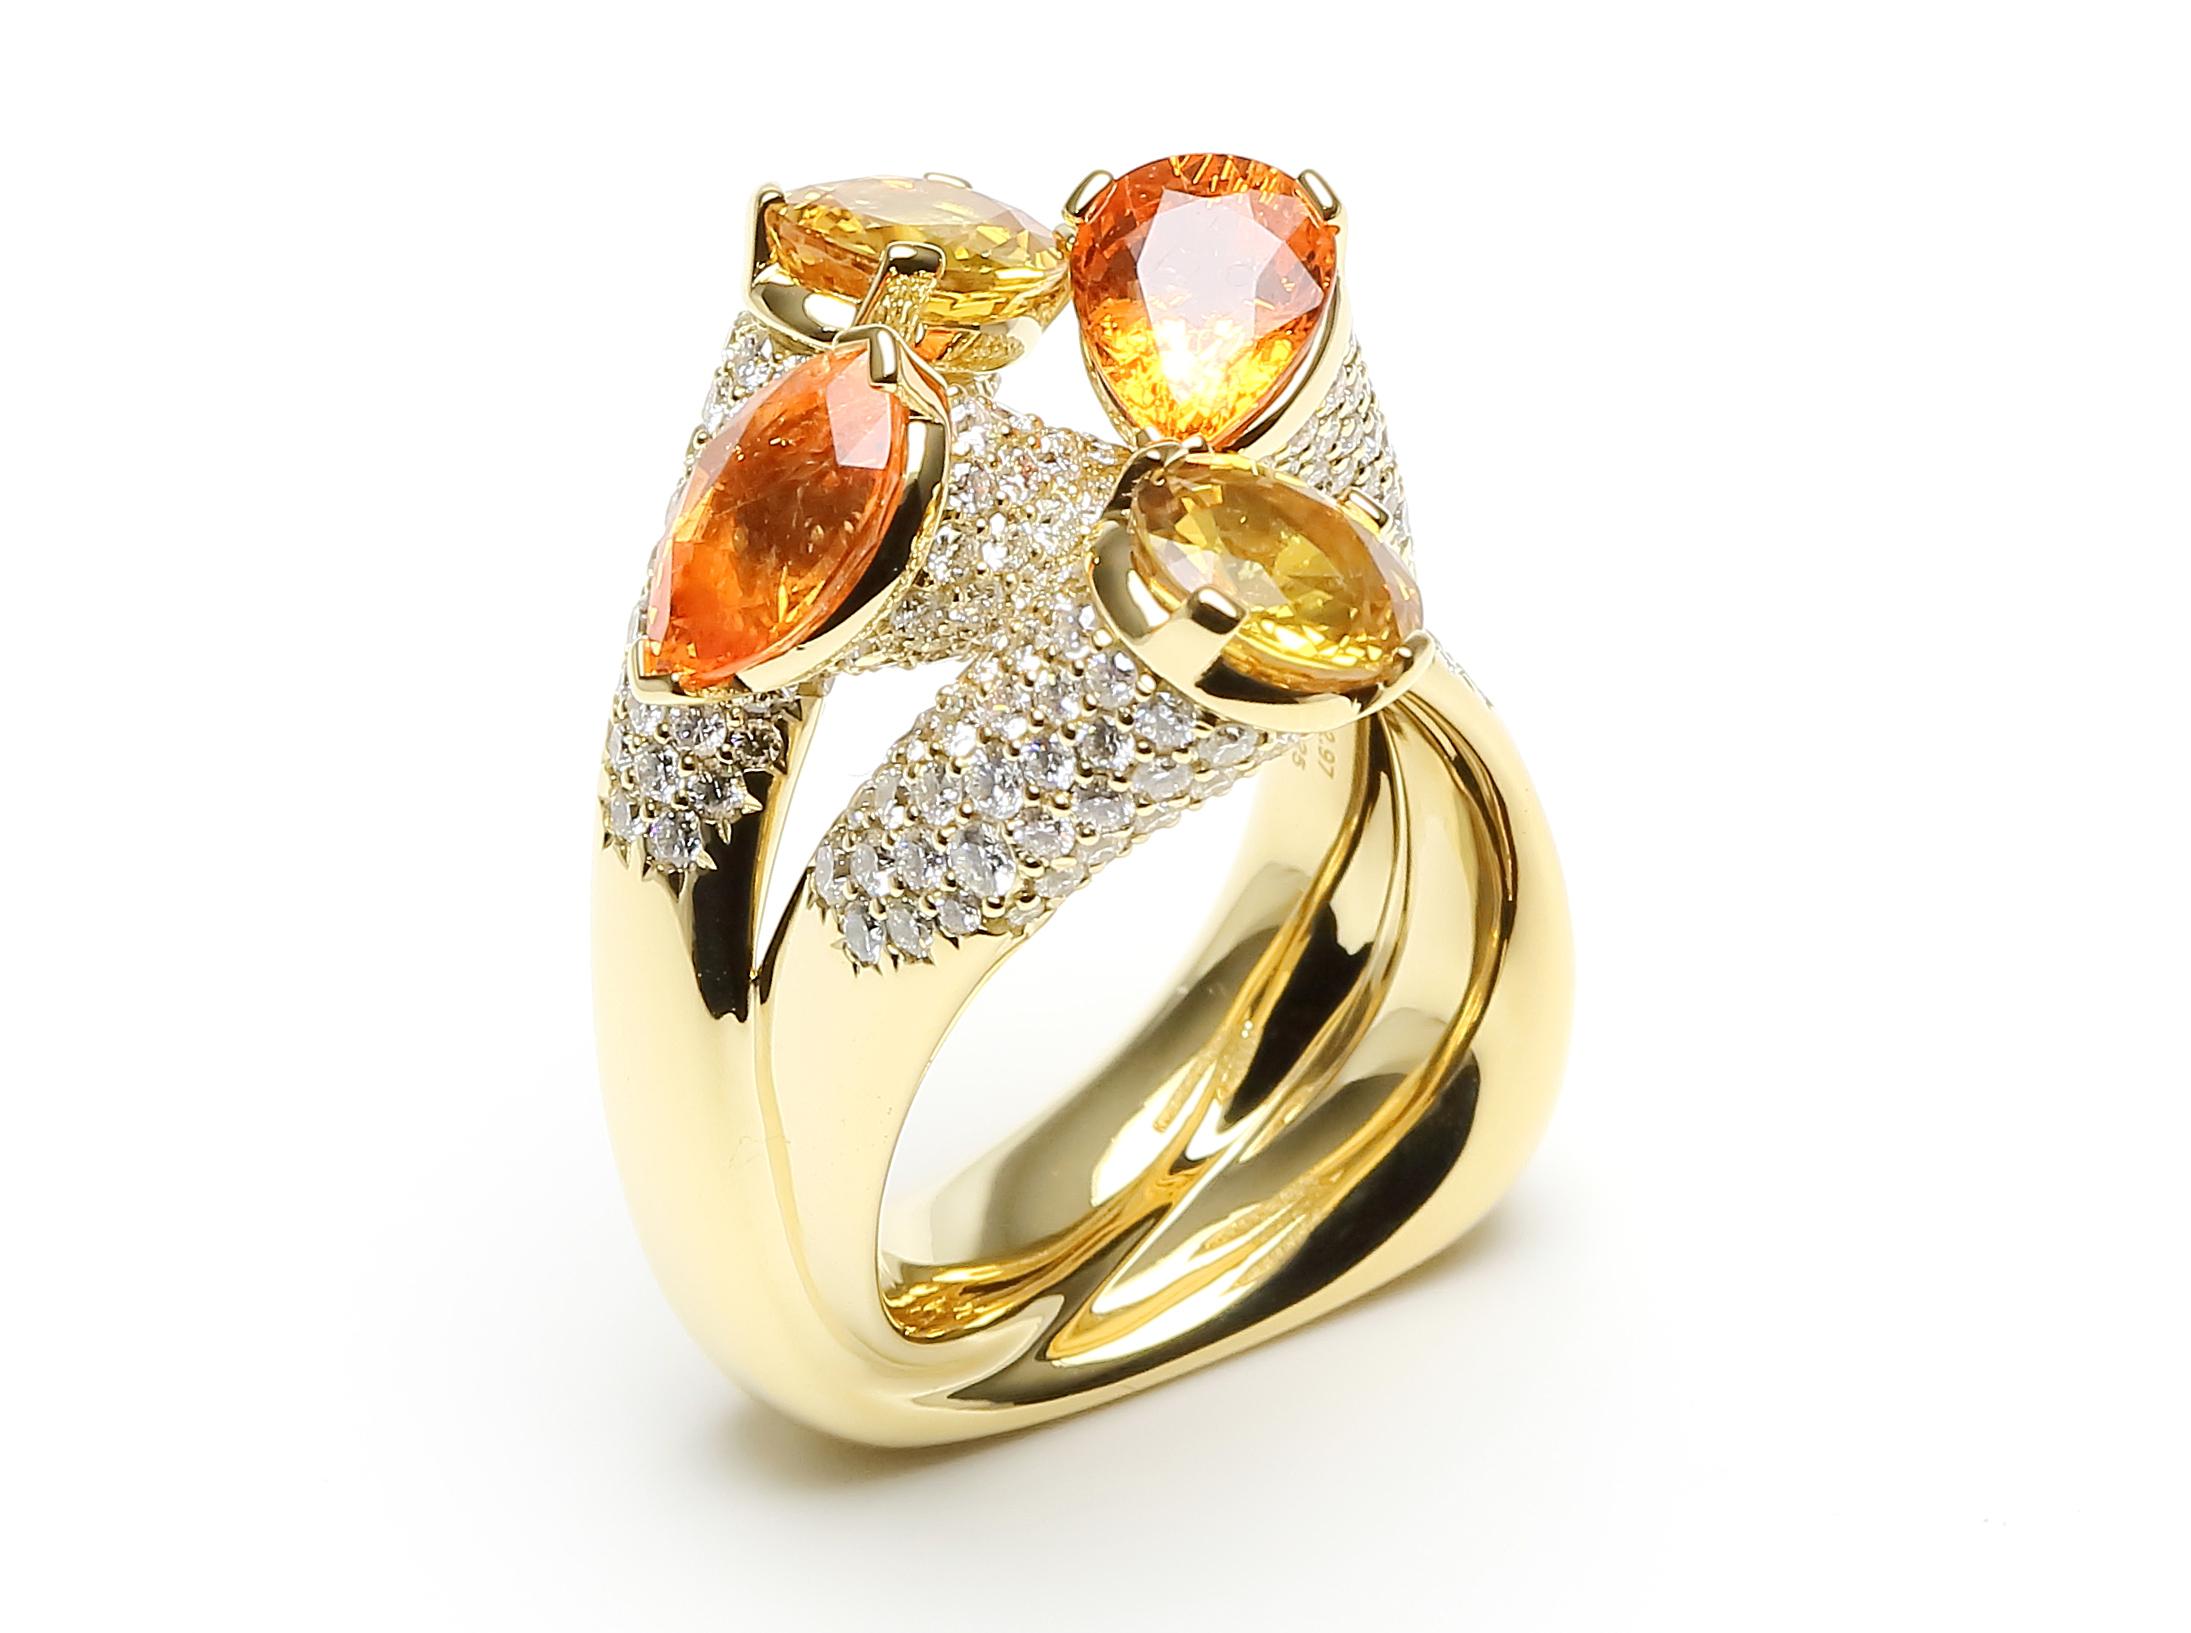 Sunrise Twist Layers Ring

Diamond Orange Yellow Sapphire Cocktail Luxury Unique 18 Karat Yellow Gold Ring 

The winning swing and the architectural purity are the relevant ingredients for these rings of contemporary inspiration. Not only a matter